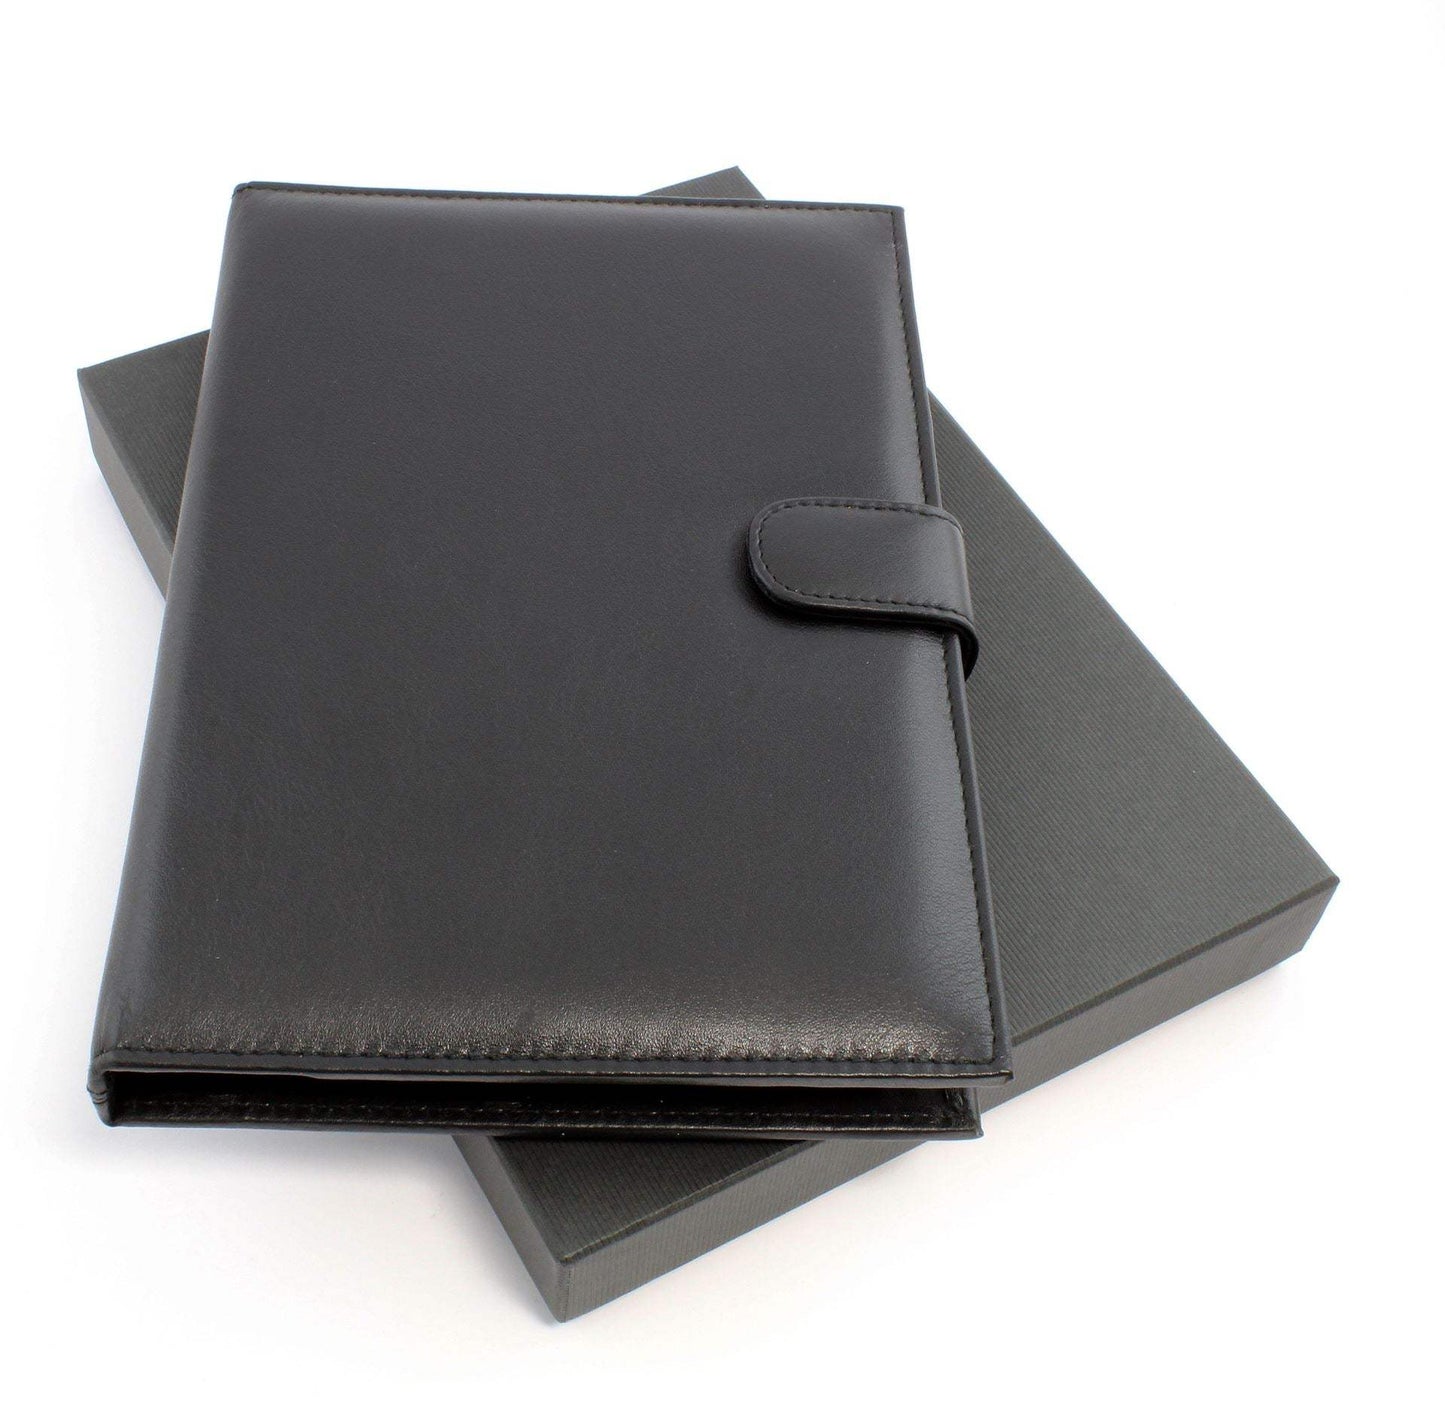 Sandringham Nappa Leather Notebook Jacket - The Luxury Promotional Gifts Company Limited